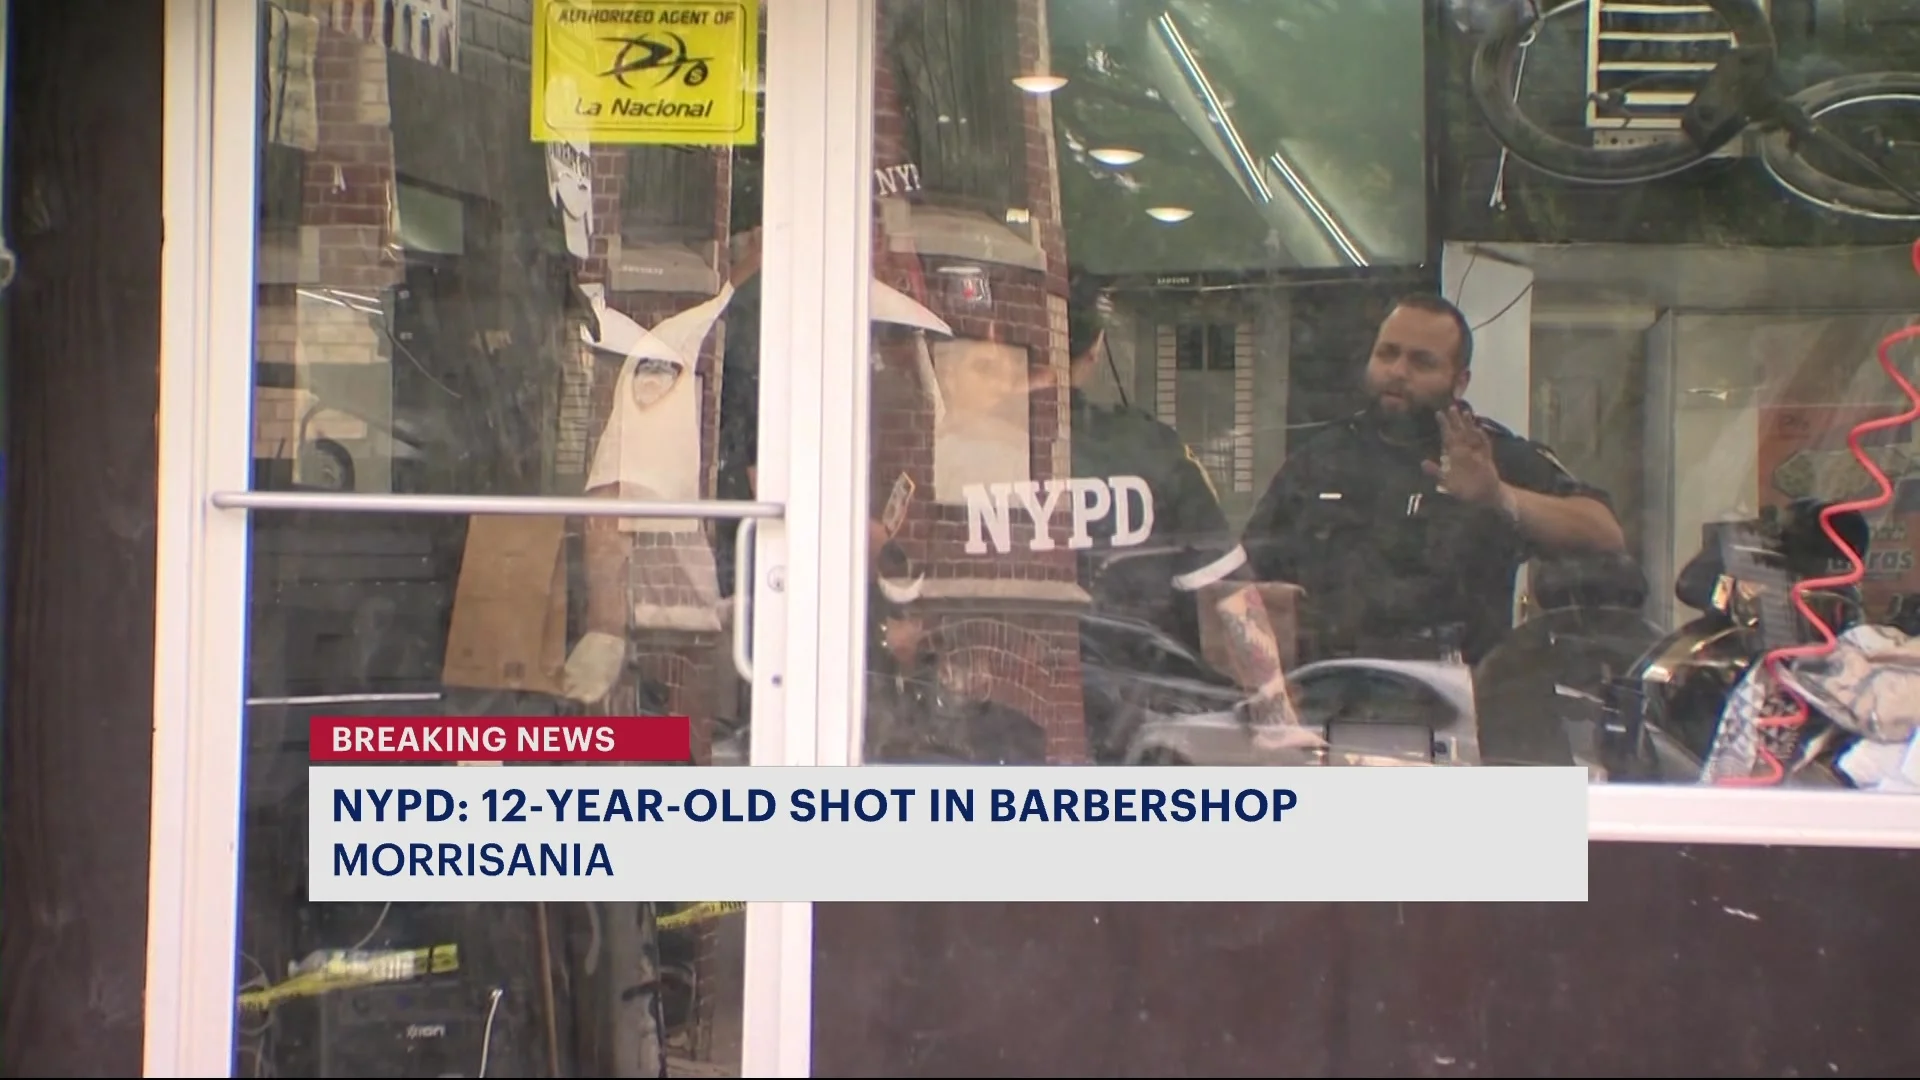 NYPD: 12-year-old boy shot in Morrisania barbershop